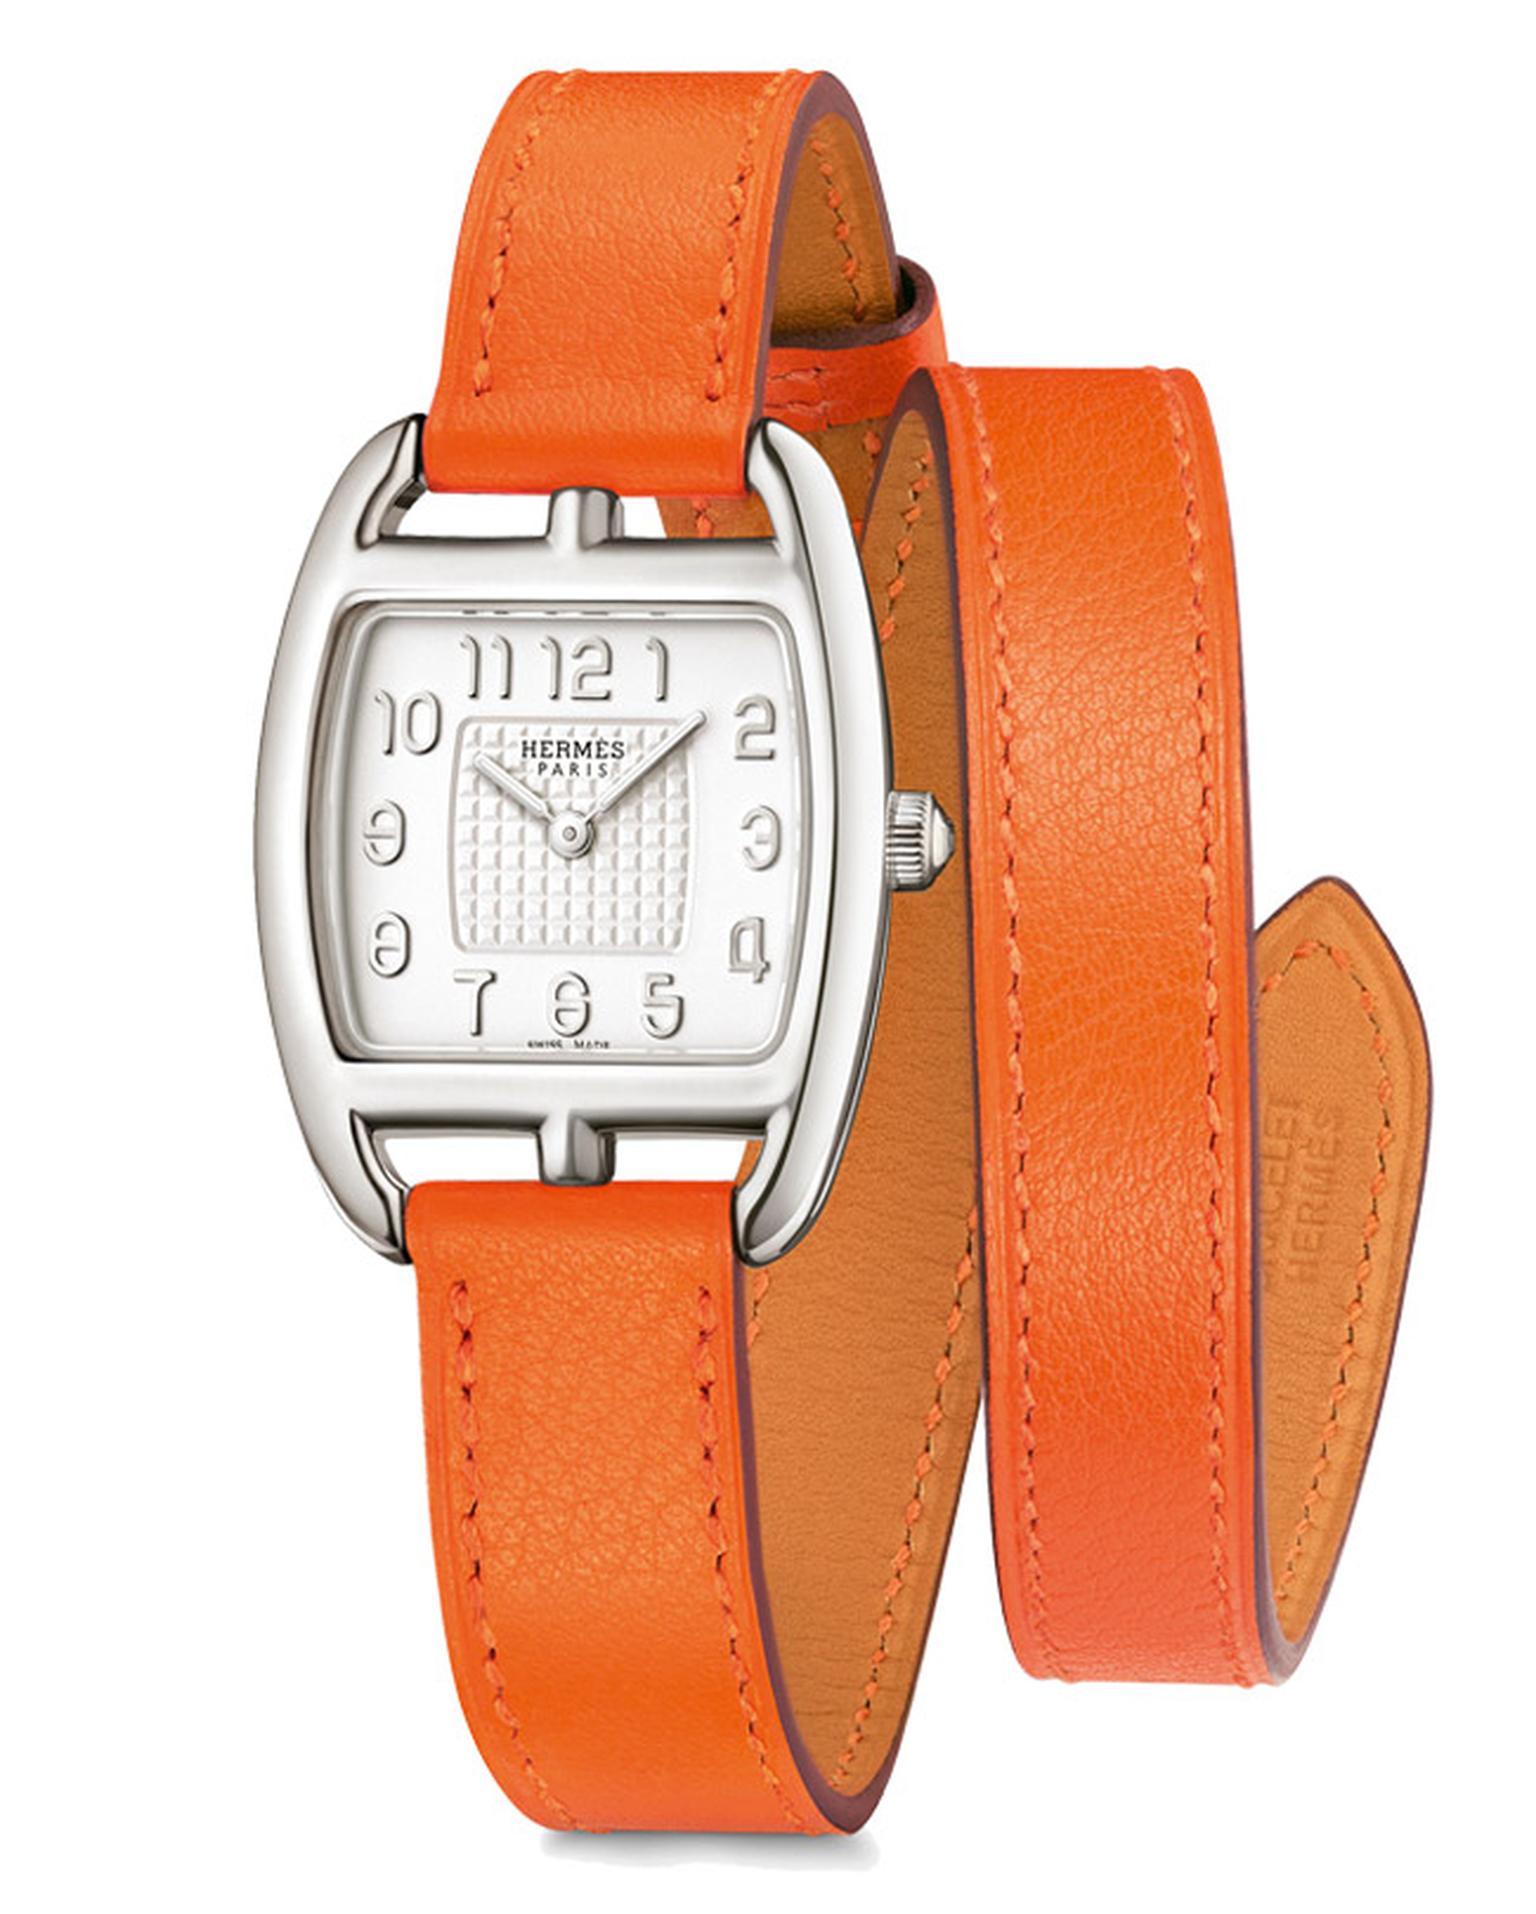 The Cape Cod Tonneau GM Silver watch is made in Hermès’ new patented silver alloy, with a super soft and supple burnt orange Hermès leather strap that wraps twice around the wrist (£2,400).